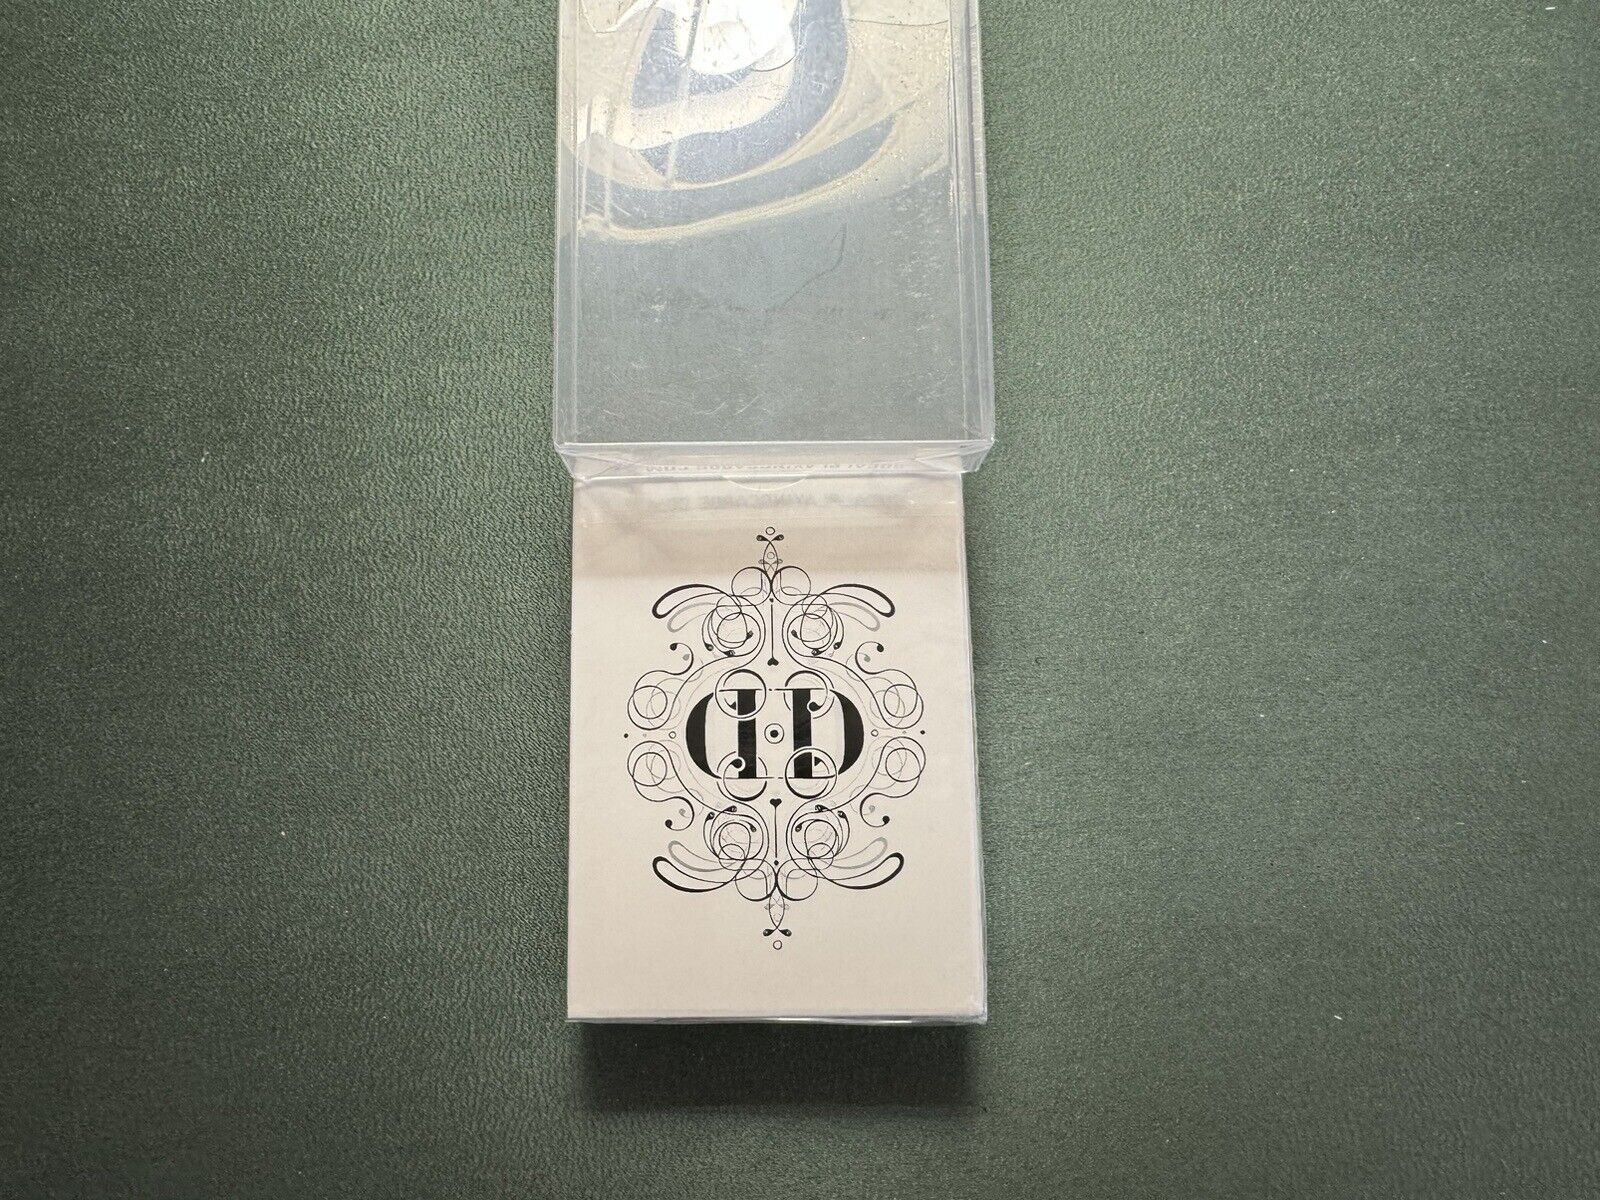 Rare Smoke And Mirrors V2 Special Edition Playing Cards By Dan & Dave Smoke Ed